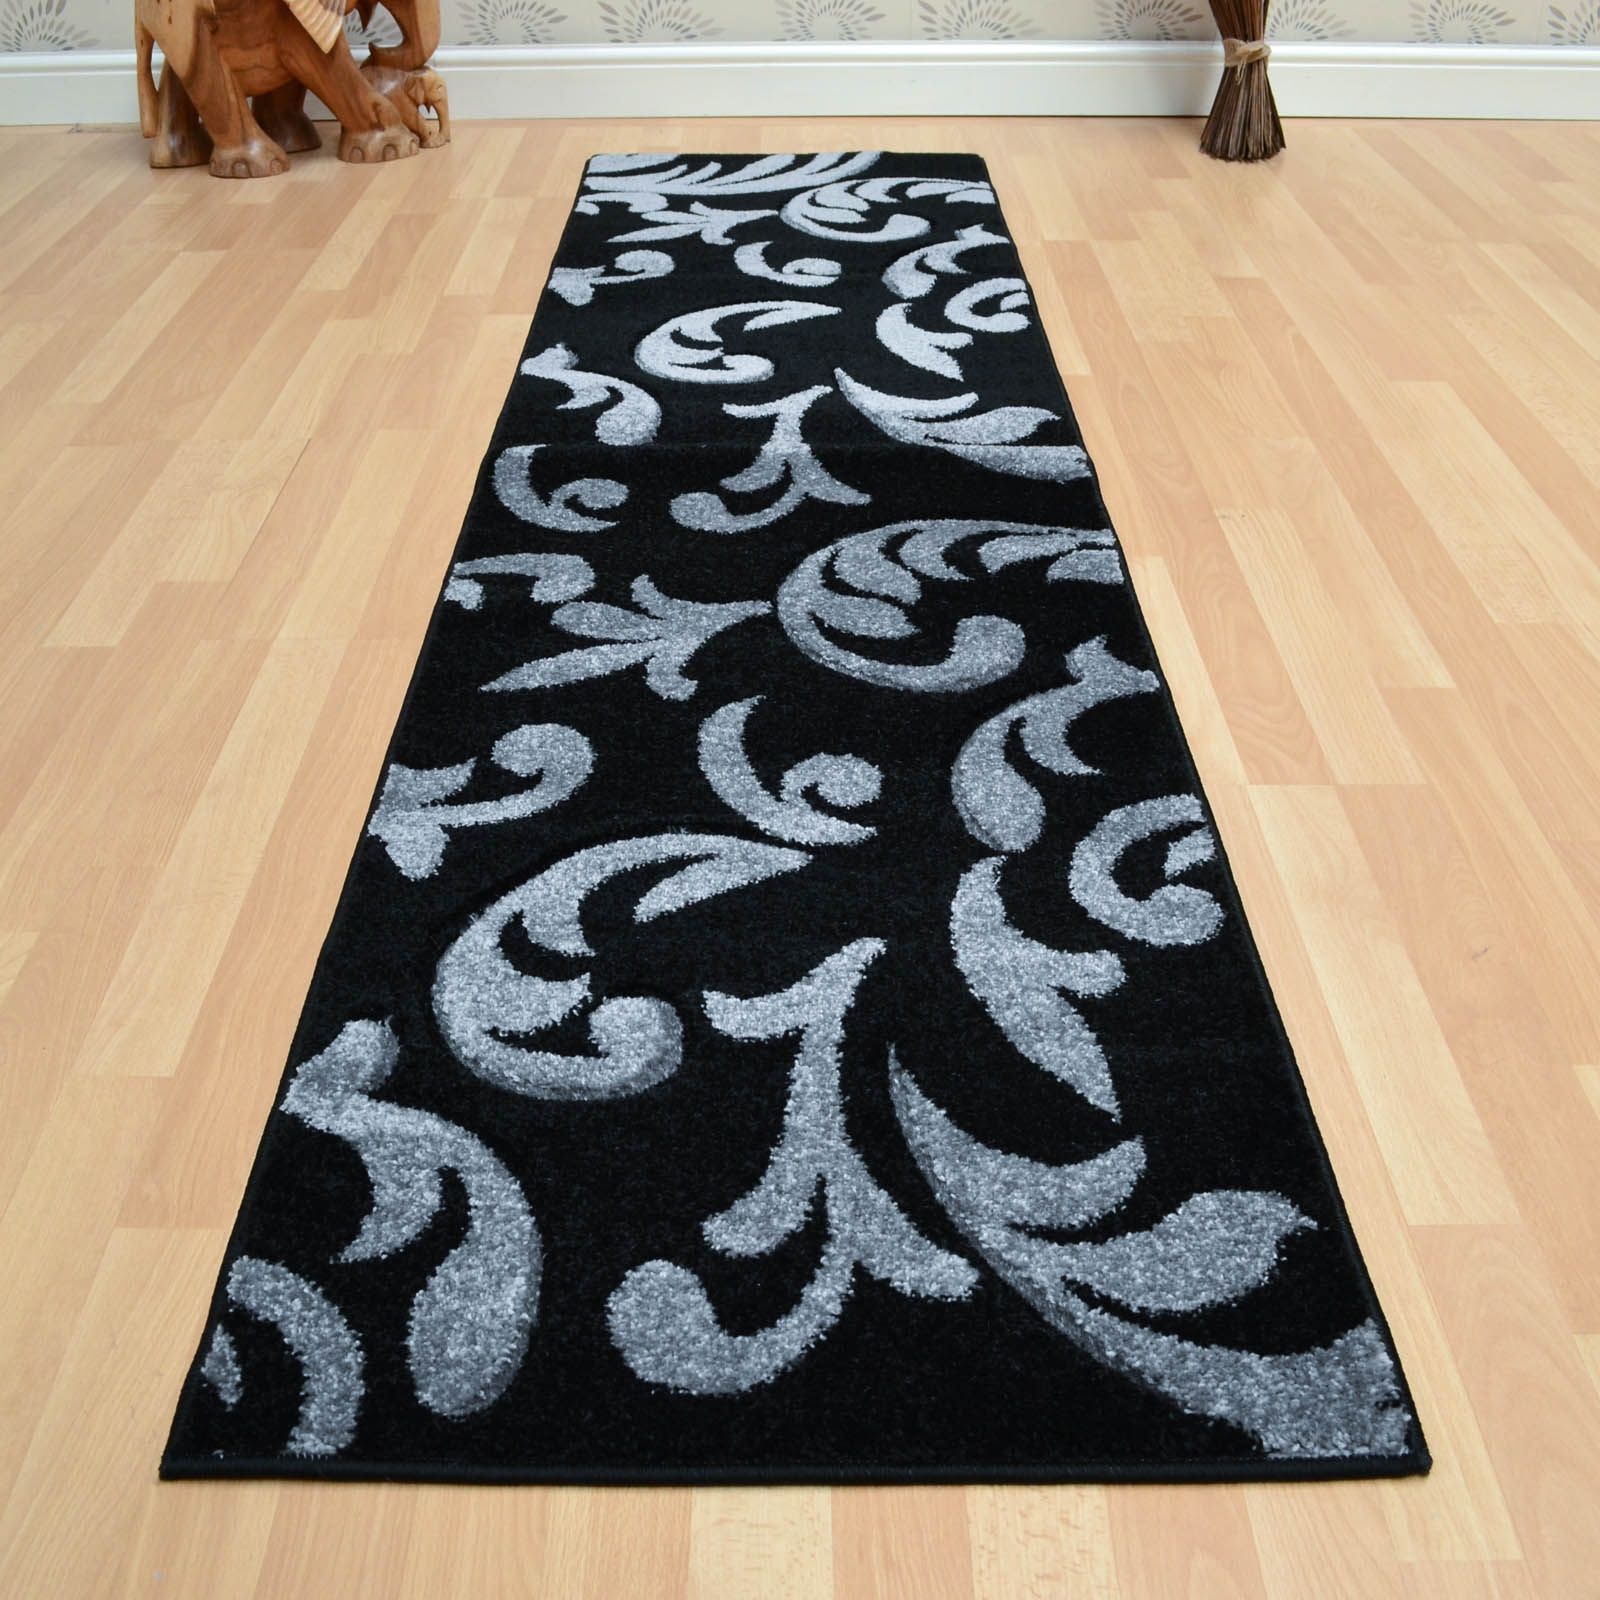 Couture Hallway Runners Cou08 Black Grey Free Uk Delivery The Regarding Hallway Runners Black And Grey (View 18 of 20)